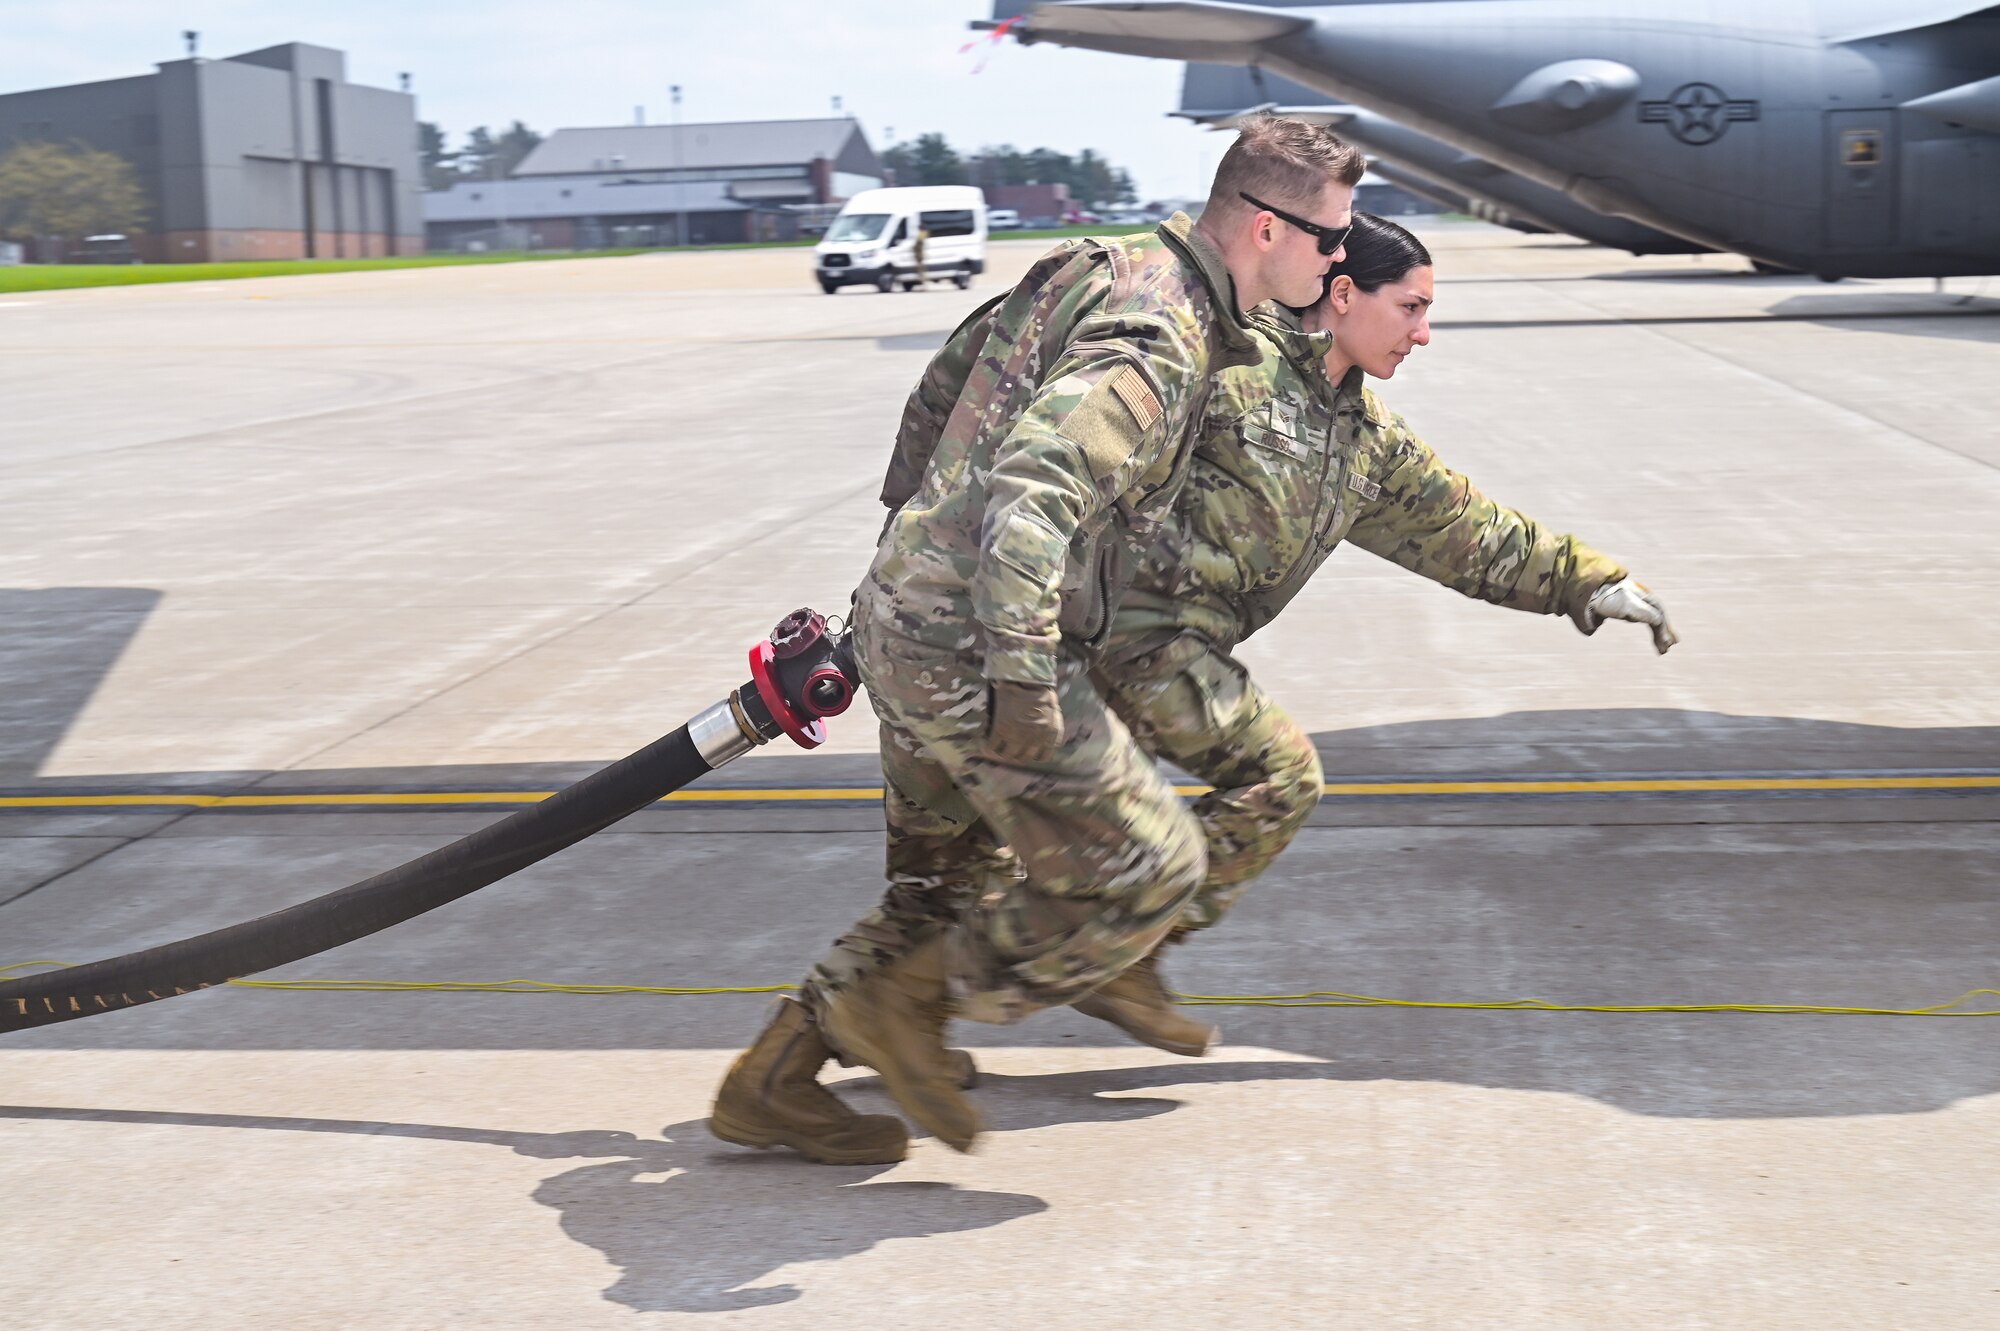 Tech. Sgt. Taylor Creston, an aerospace maintenance specialist assigned to the 910th Maintenance Squadron, and Senior Airman Victoria Russo, a fuels specialist assigned to the 910th Logistics Readiness Squadron, pull a fuel hose to a C-130H Hercules aircraft on April 25, 2023, at Youngstown Air Reserve Station, Ohio.